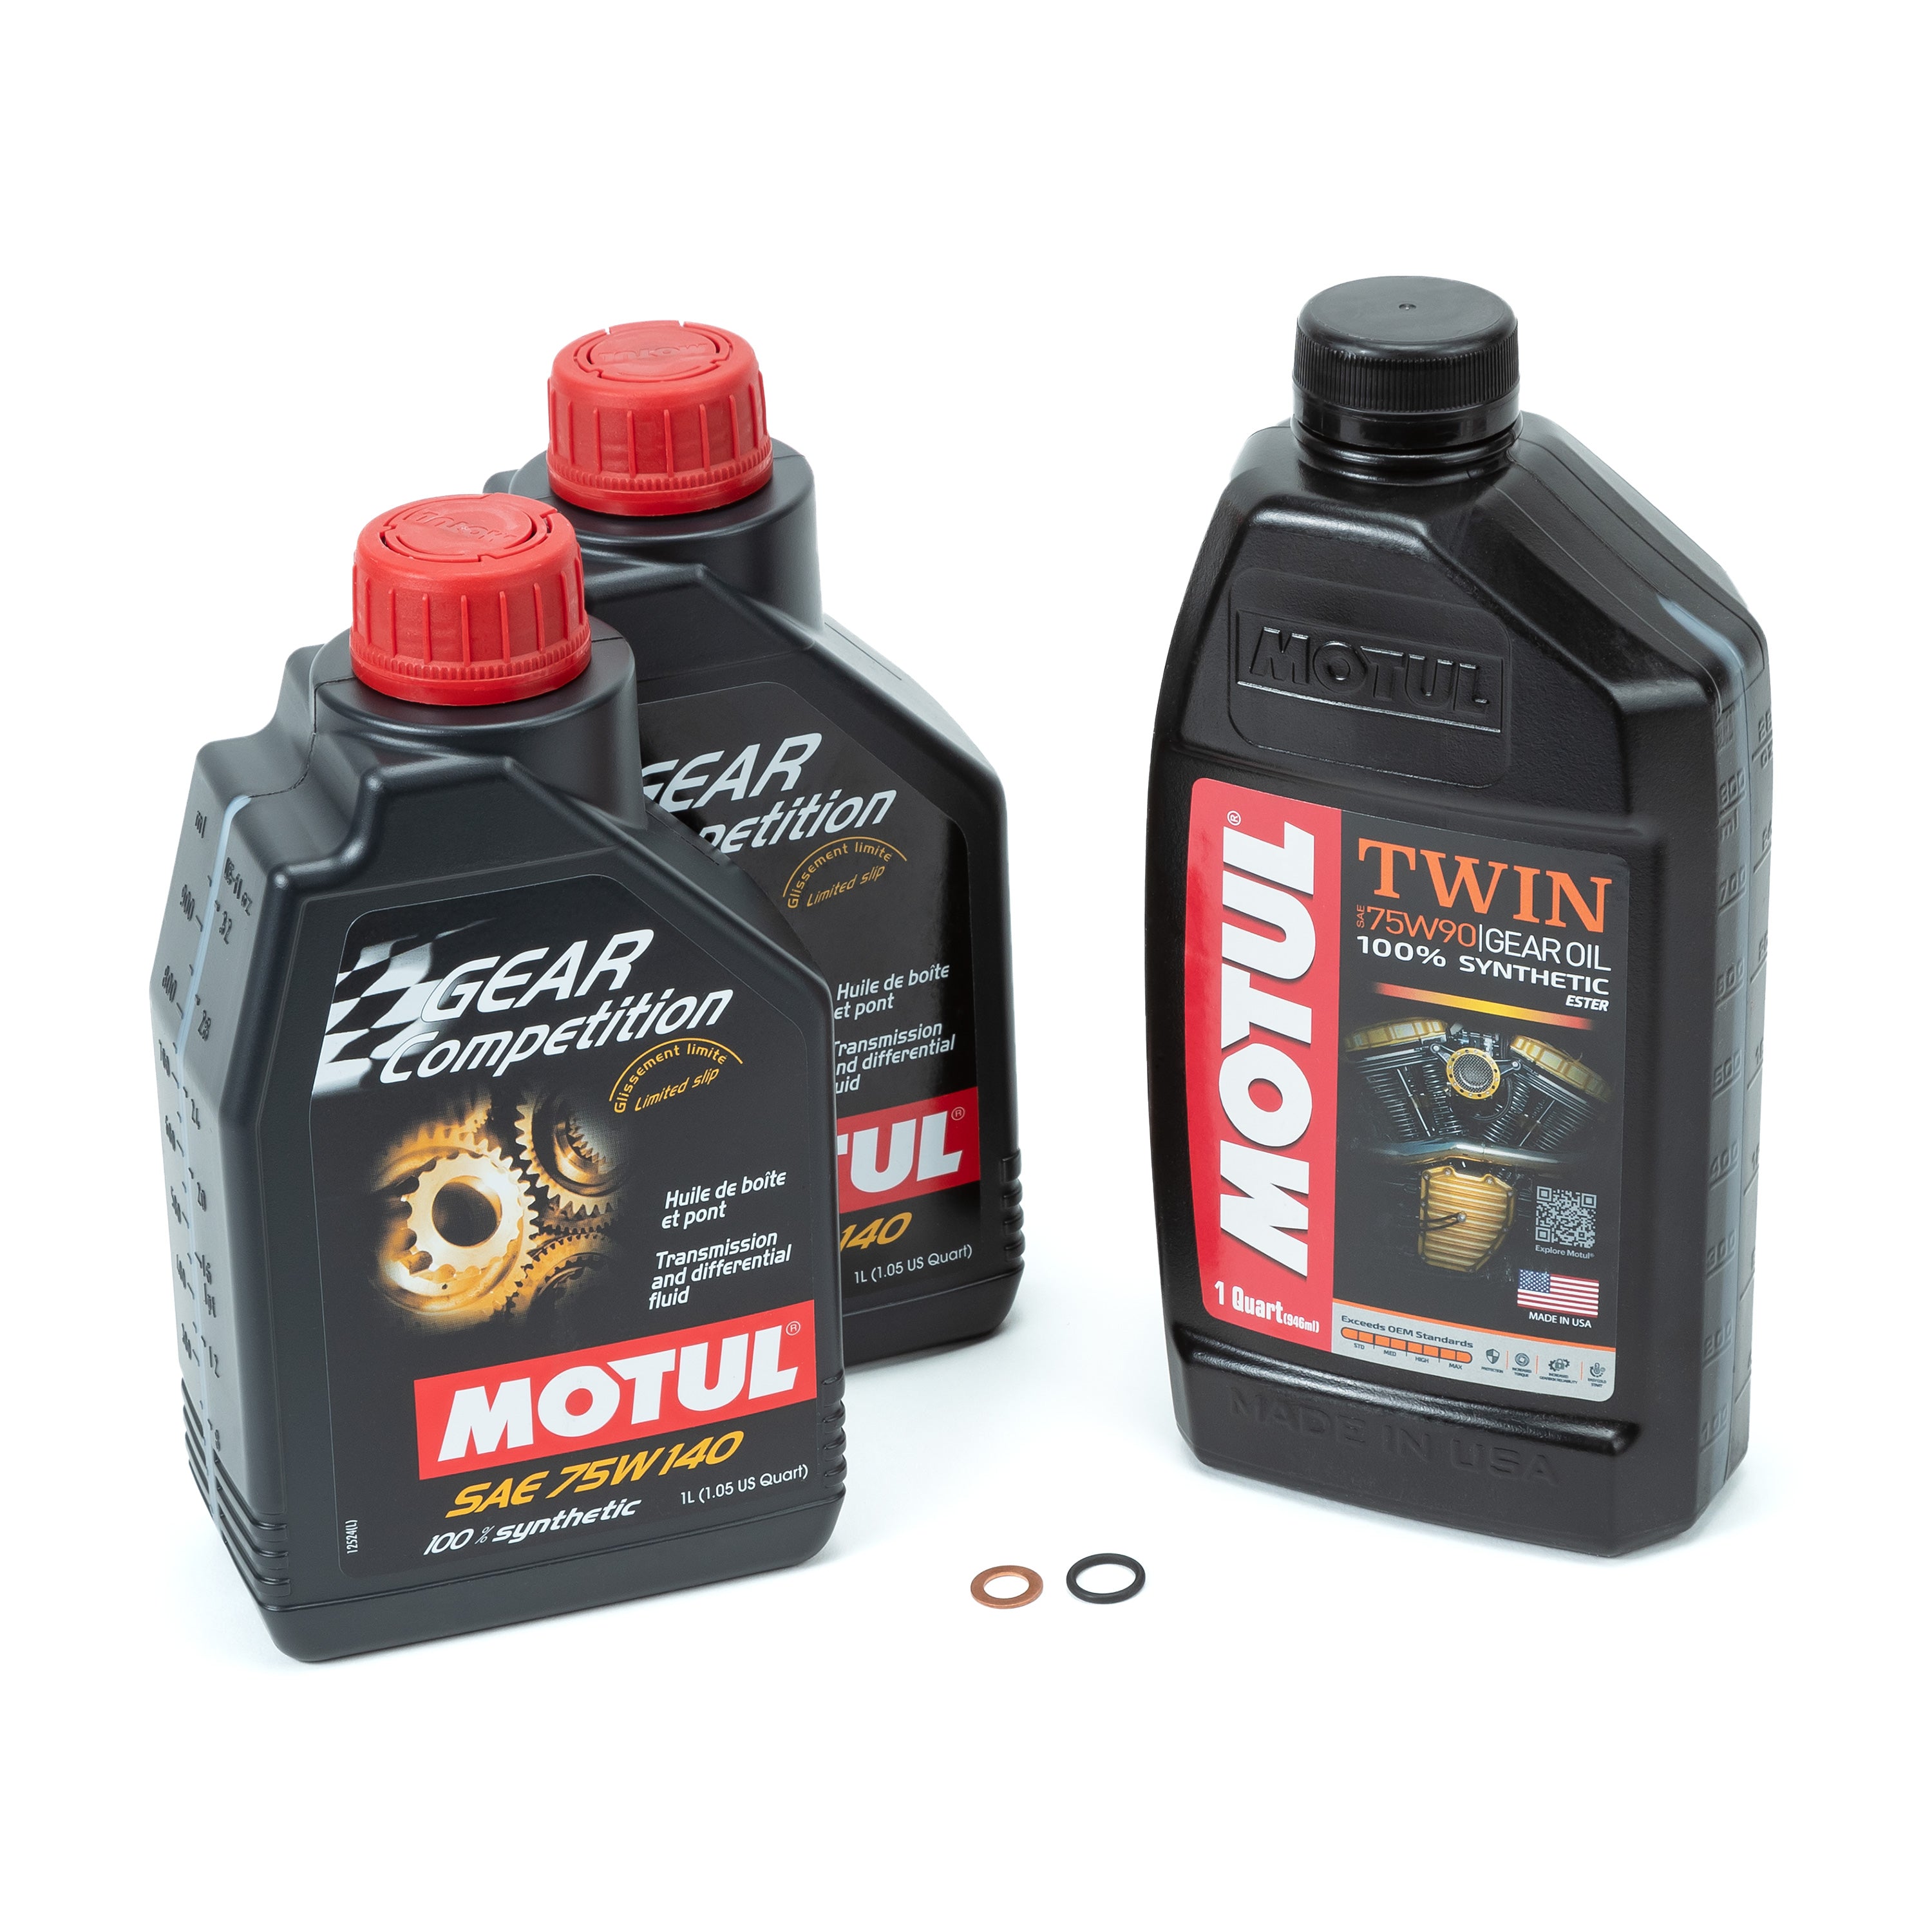 AMSOIL Can-Am X3 Engine Oil and Diff Kit